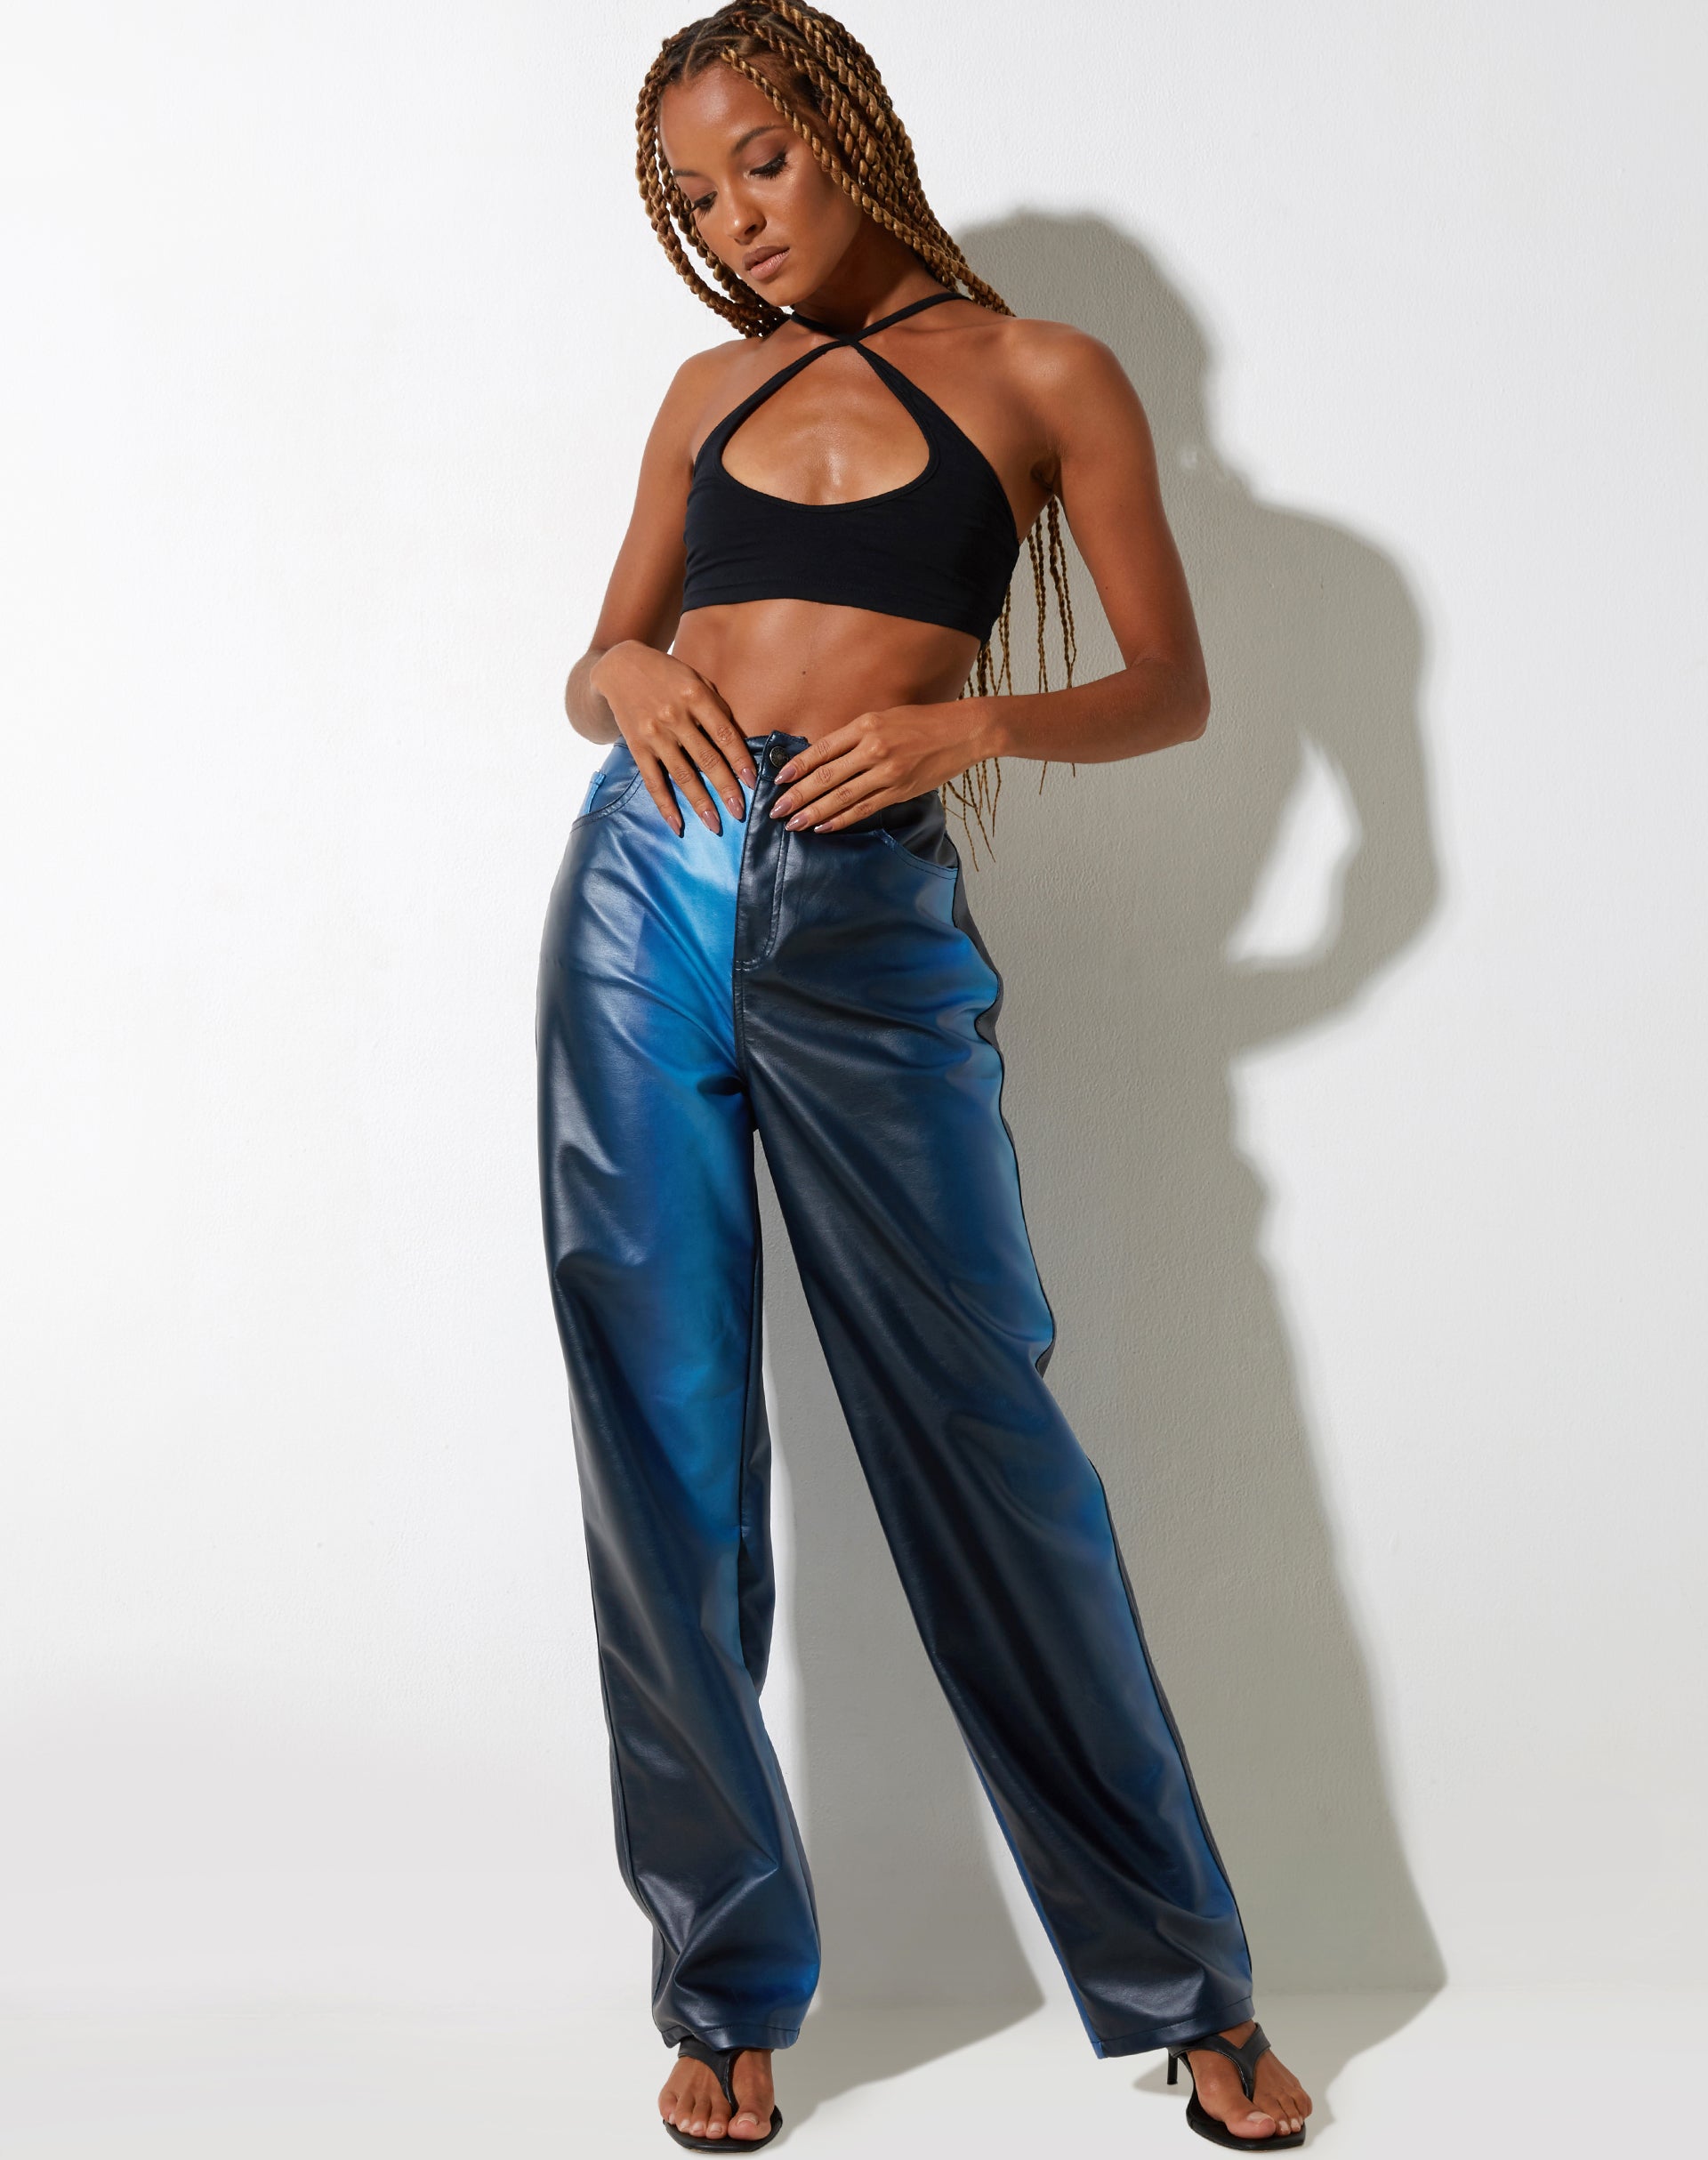 Buy parallel pants for women in India @ Limeroad